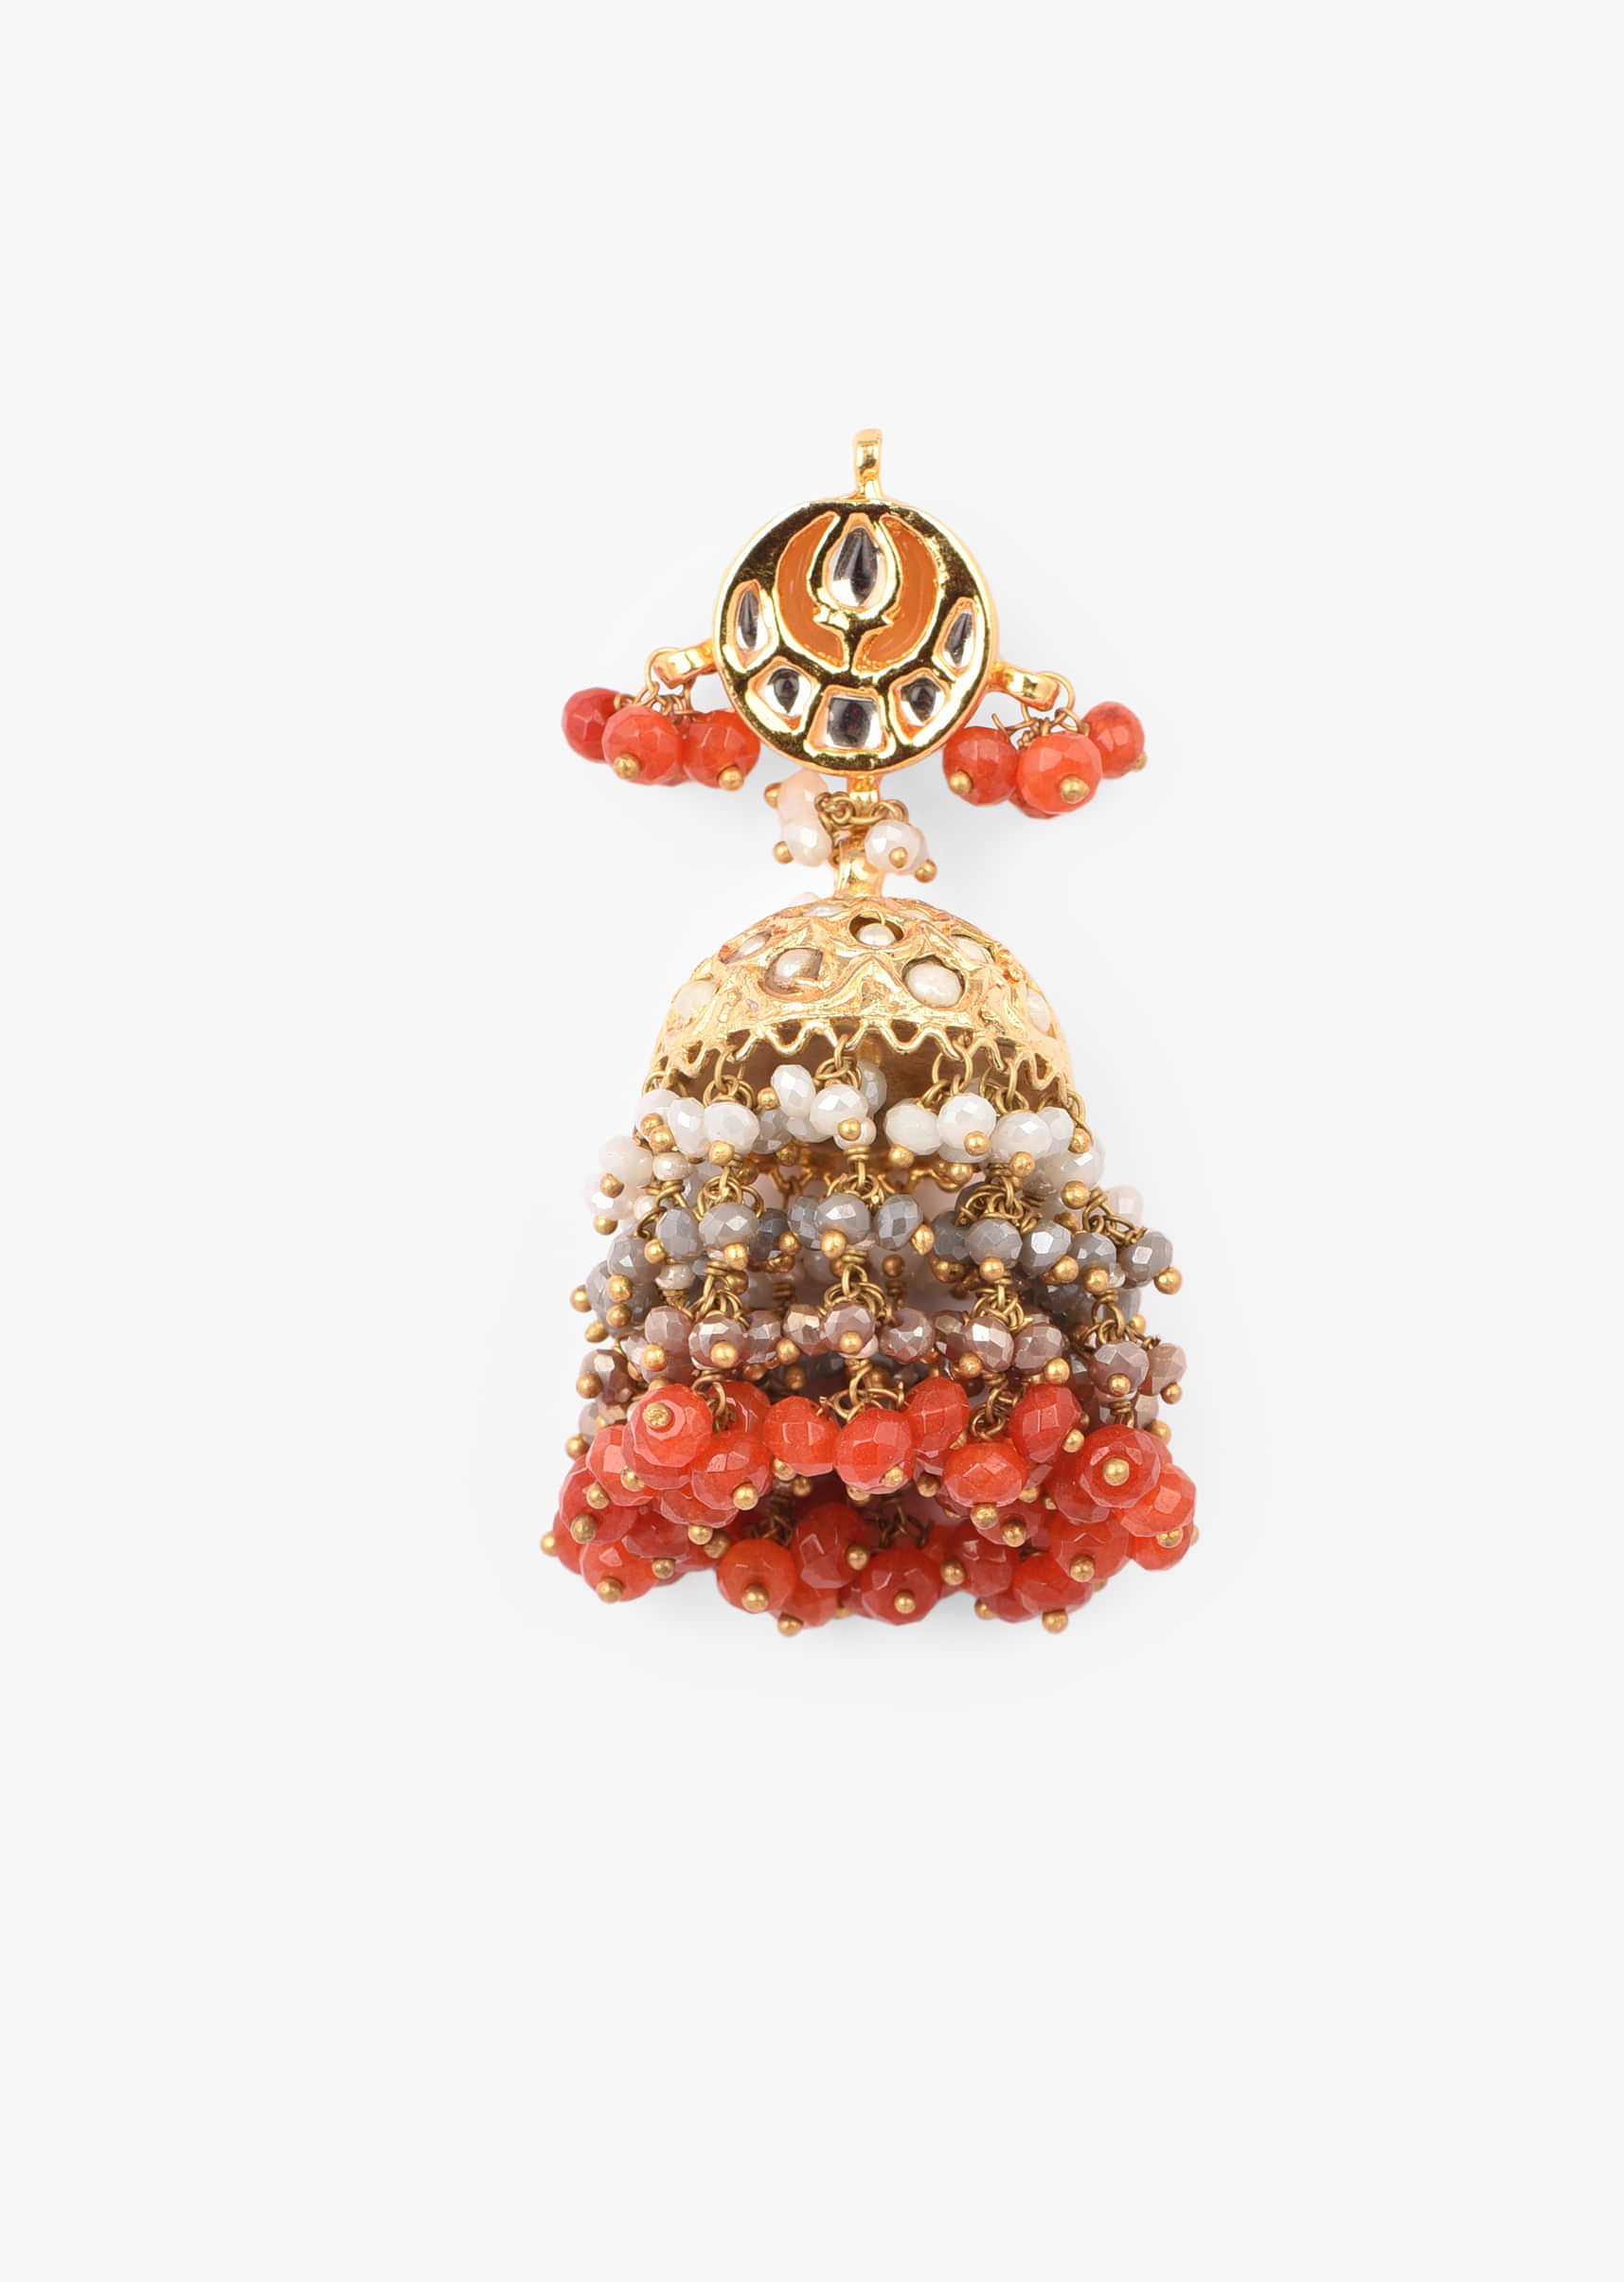 Gold Plated Necklace And Jhumka Set With Hexagon Polki And Beads Fringes In Coral And Grey Tones 